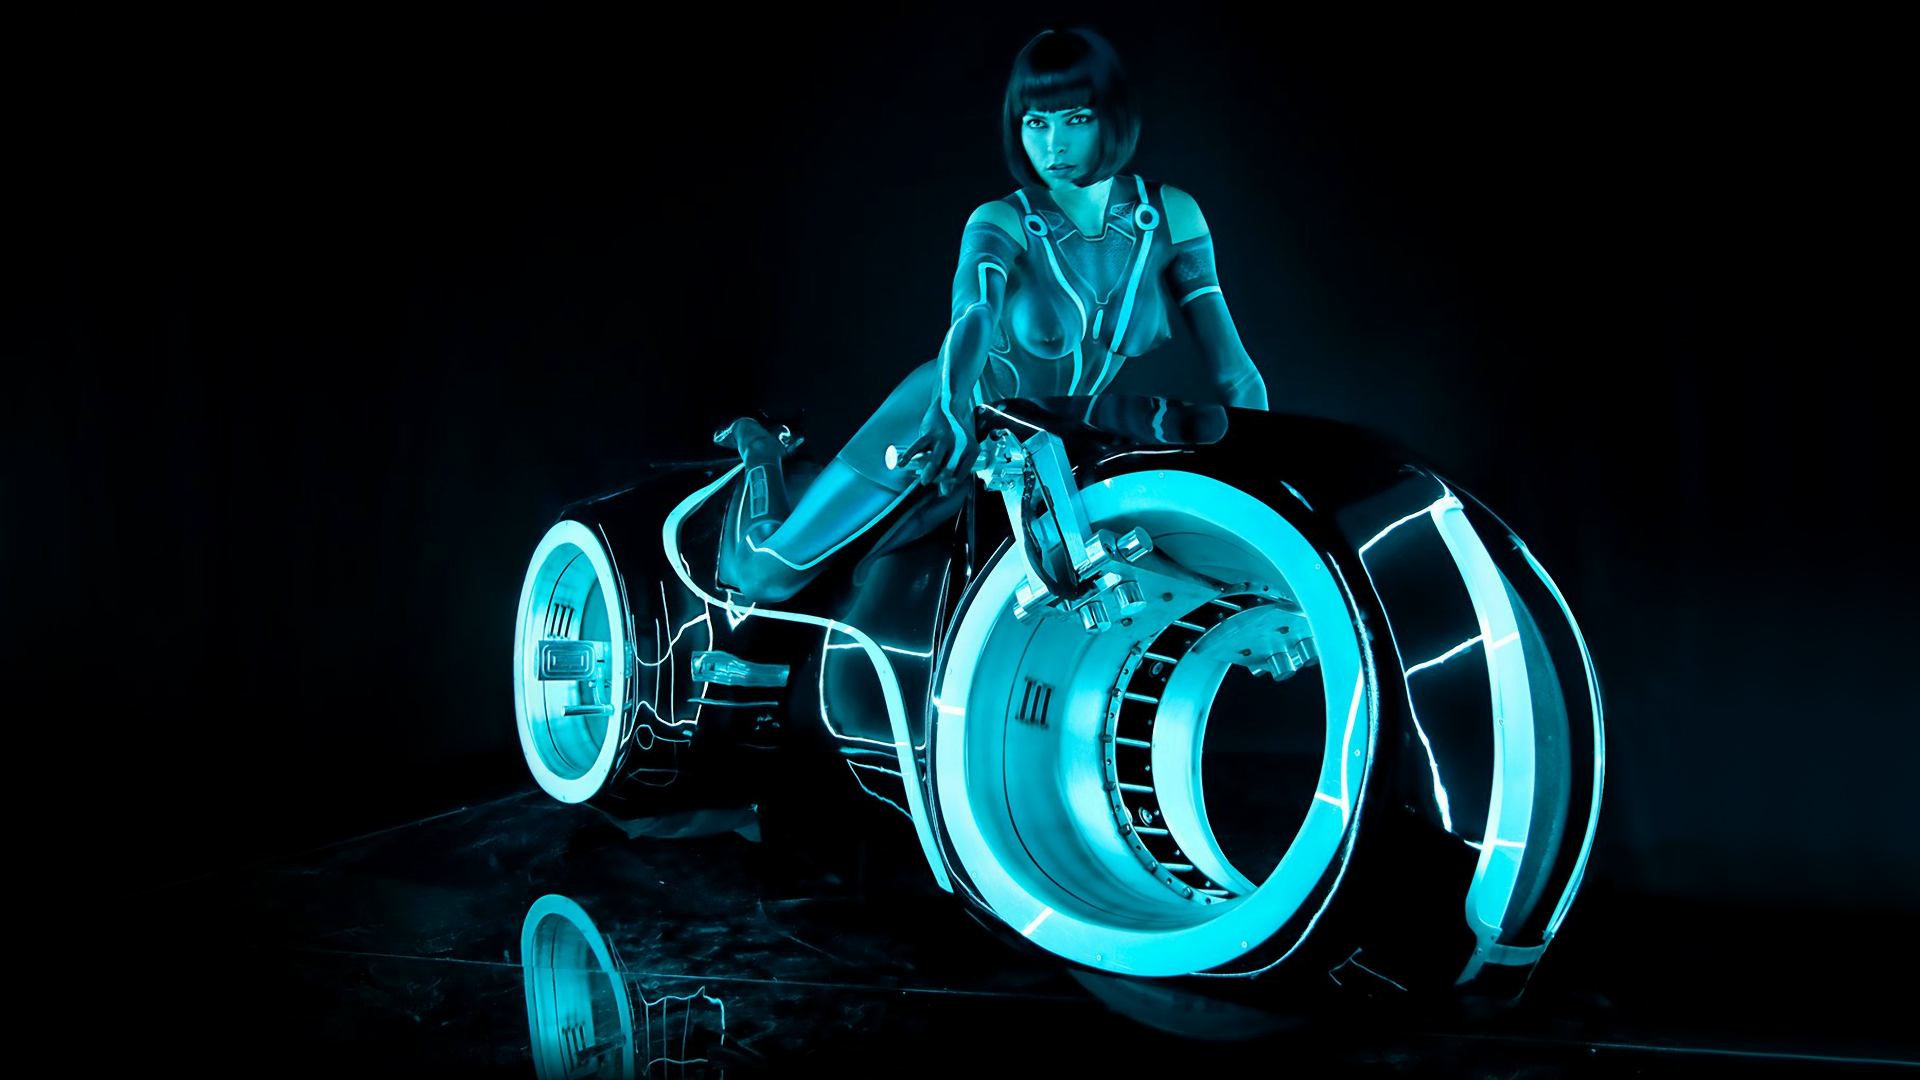 Free download tron legacy hd wallpapers x for your desktop mobile tablet explore tron legacy wallpaper tron legacy olivia wilde wallpaper tron background tron legacy backgrounds